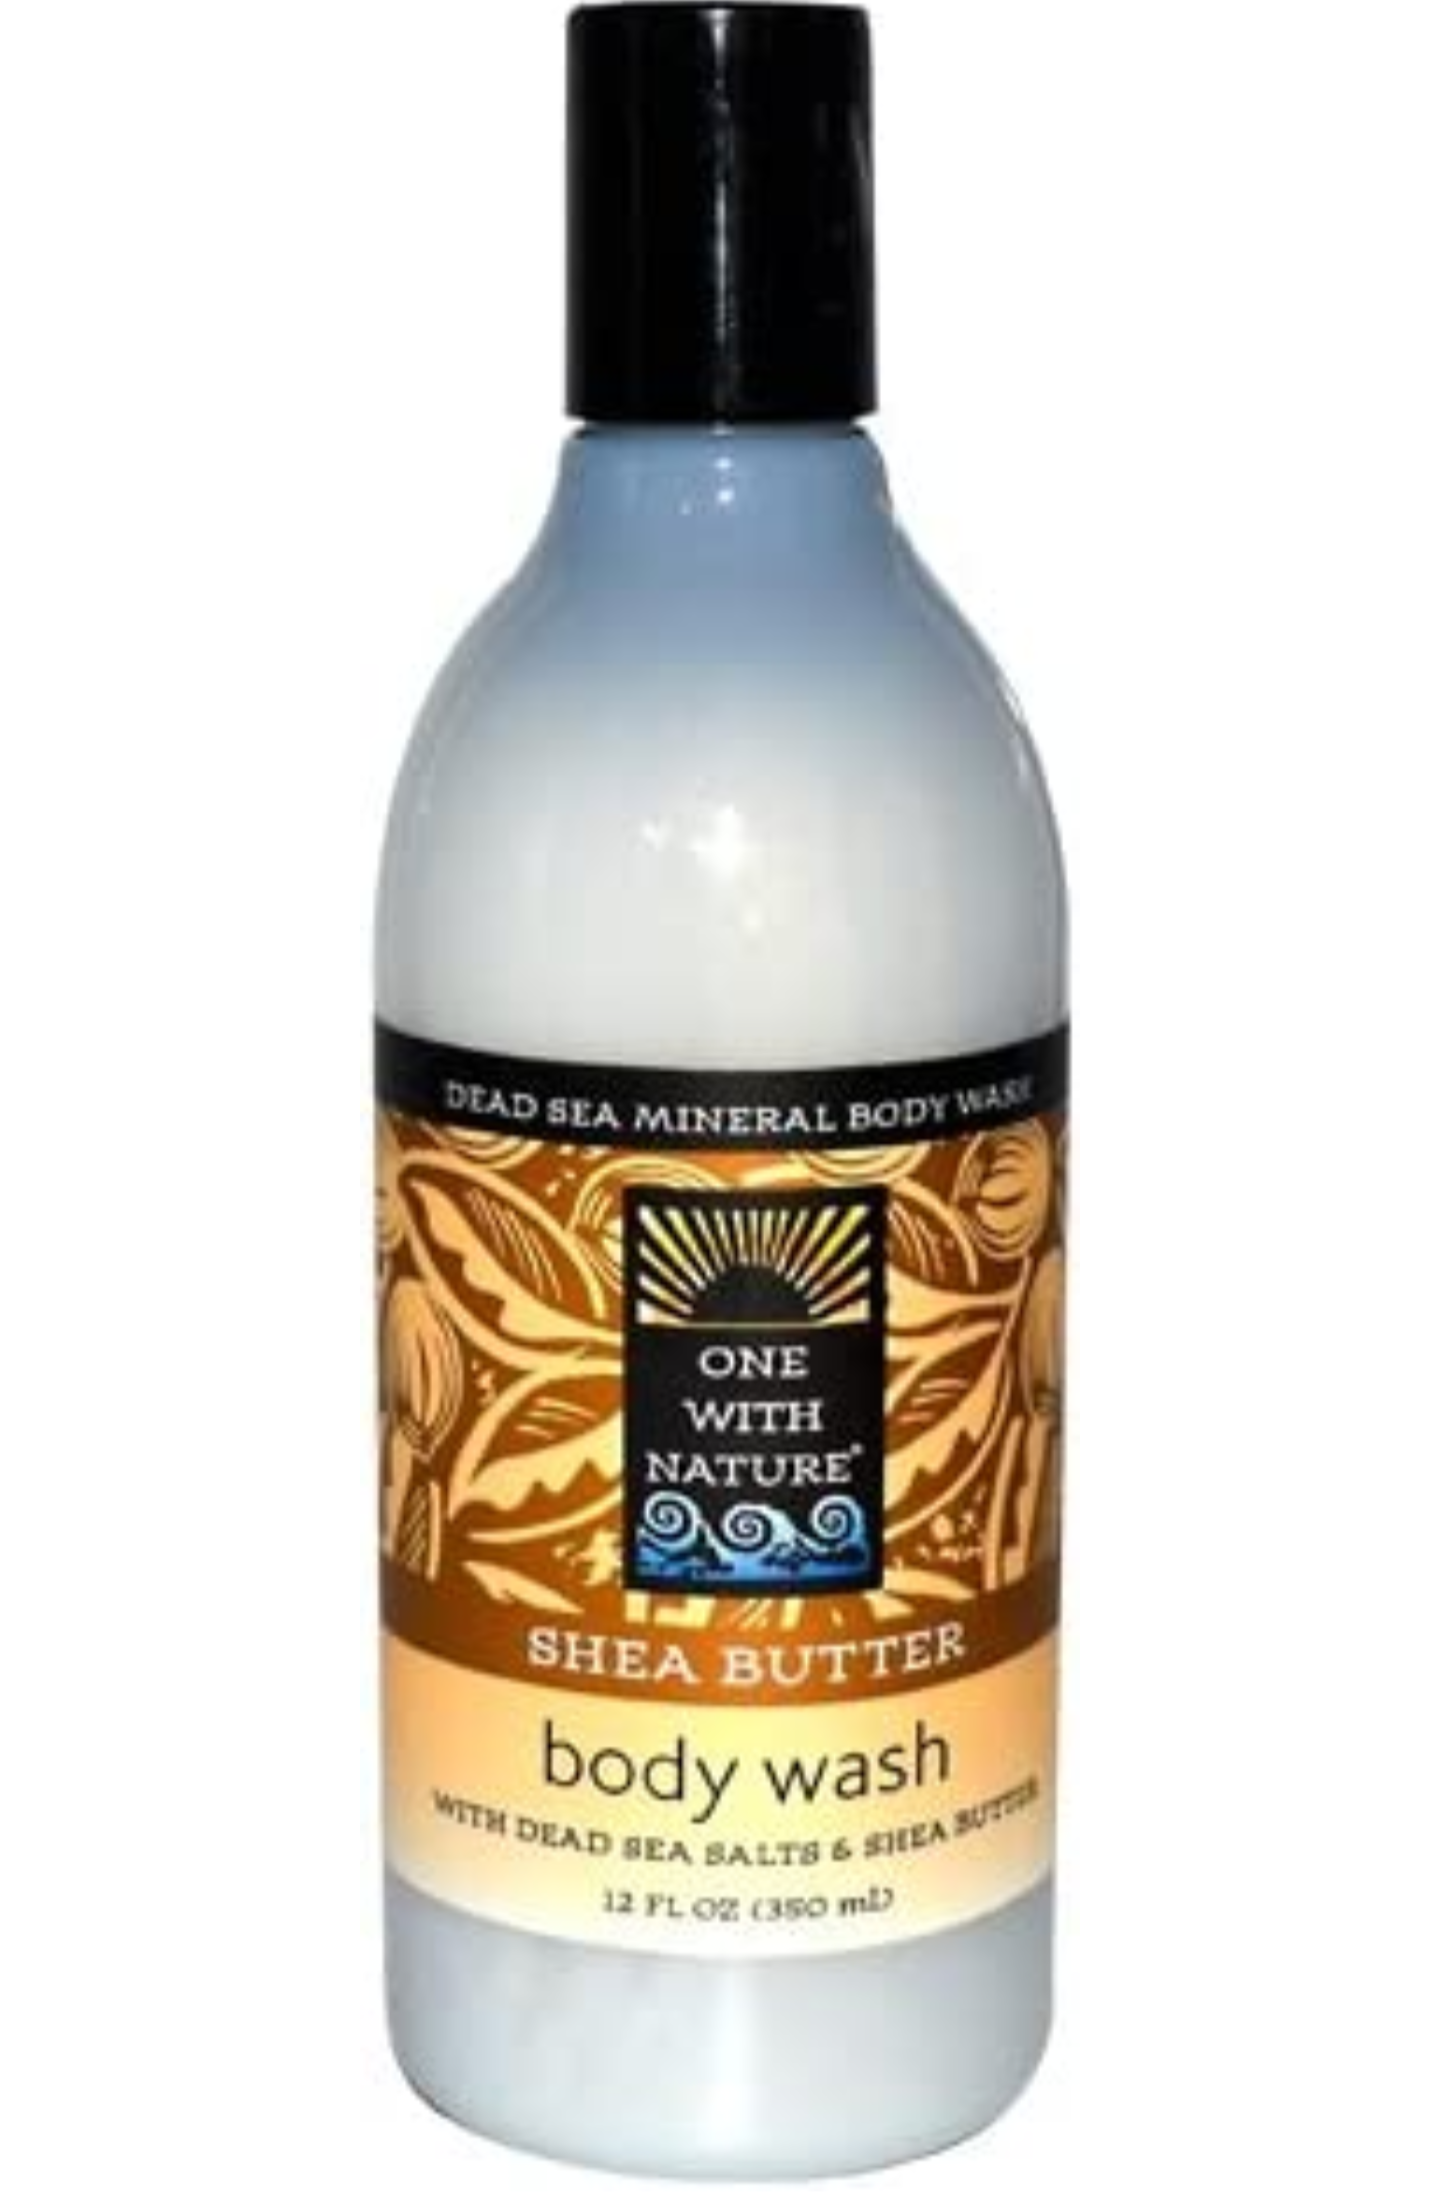 One with Nature Shea Butter Body Wash